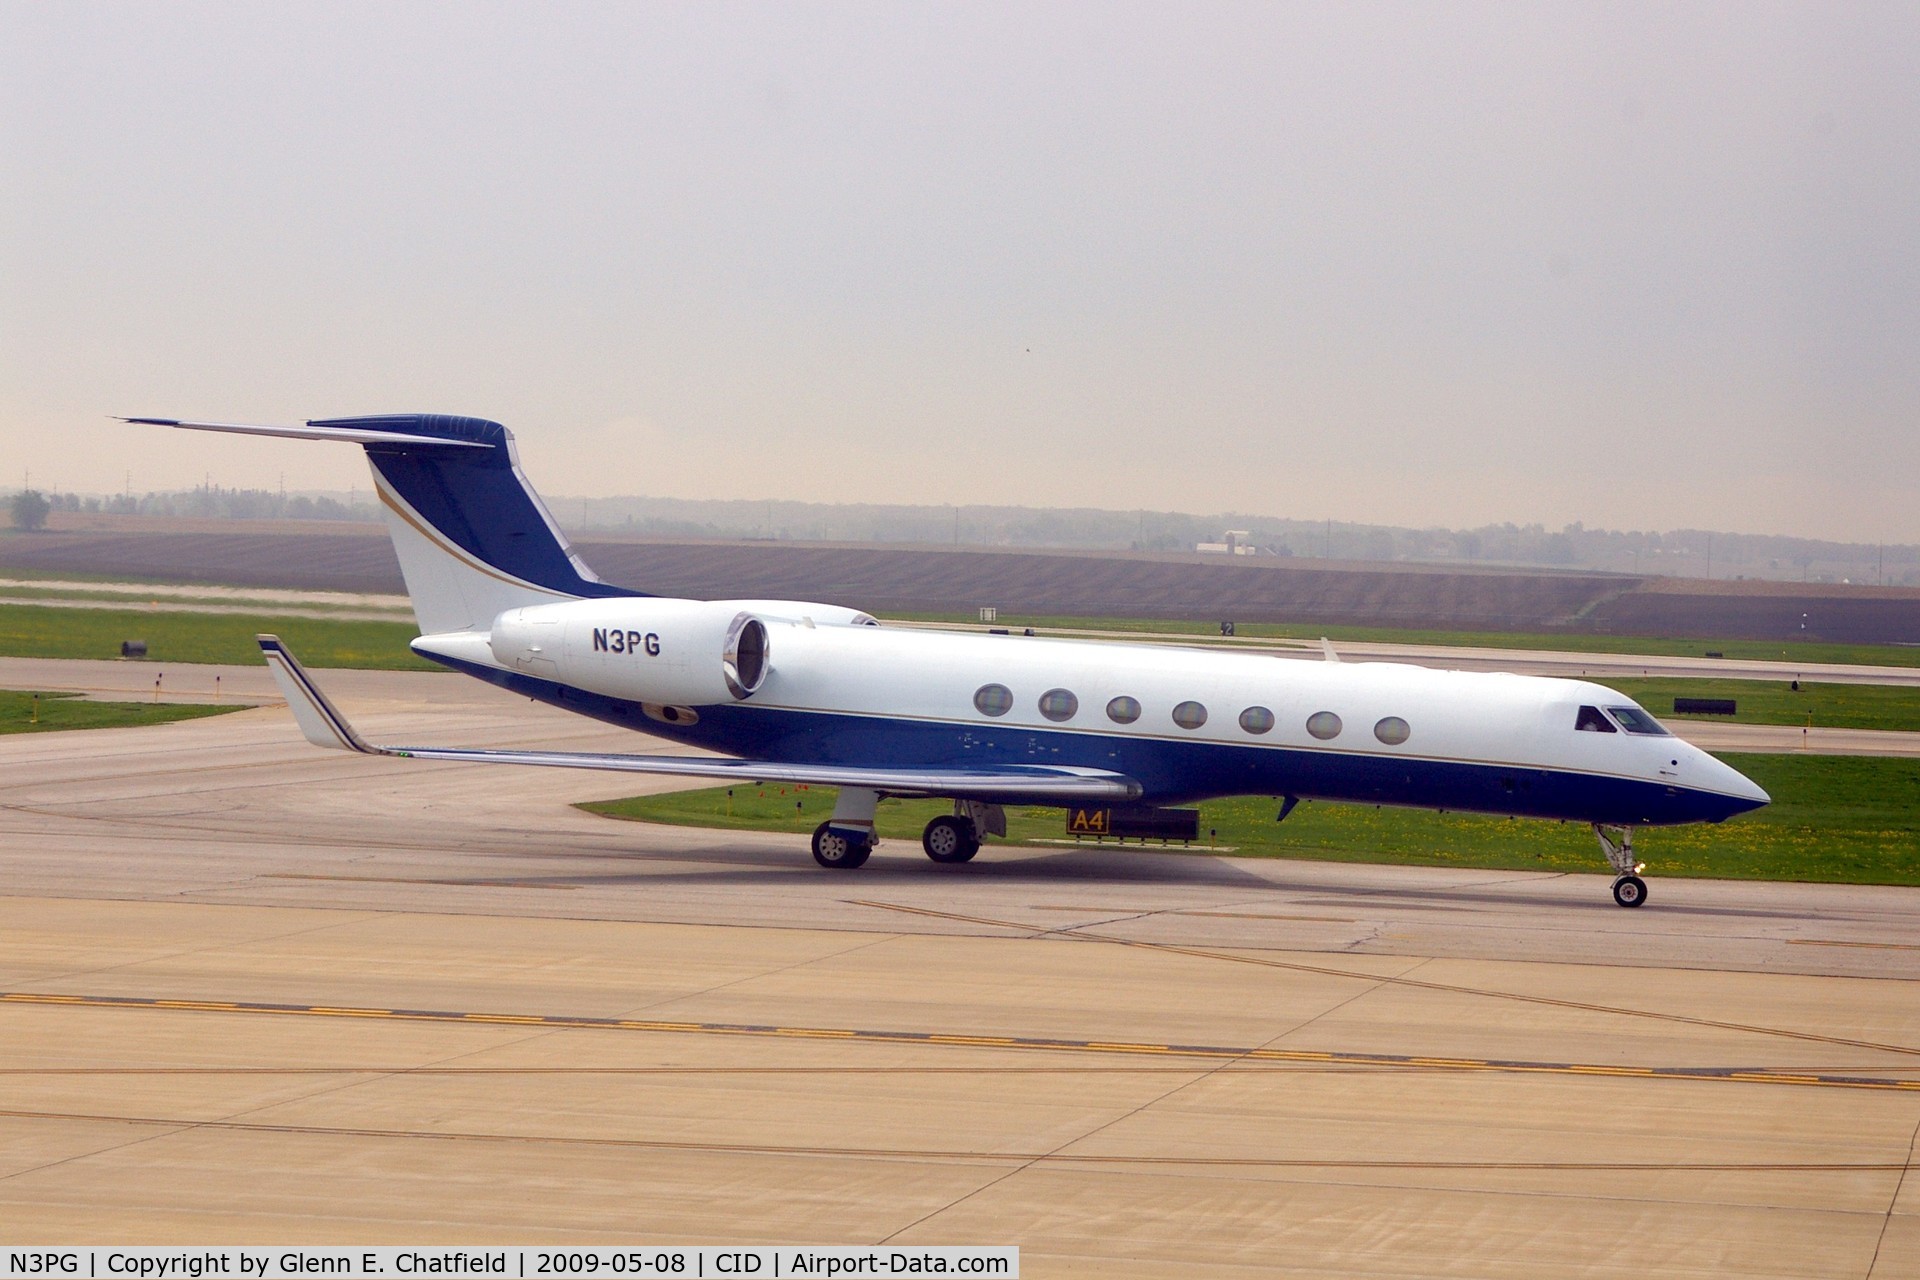 N3PG, 2005 Gulfstream Aerospace GV-SP (G550) C/N 5091, Turning from A4 to Delta for Landmark